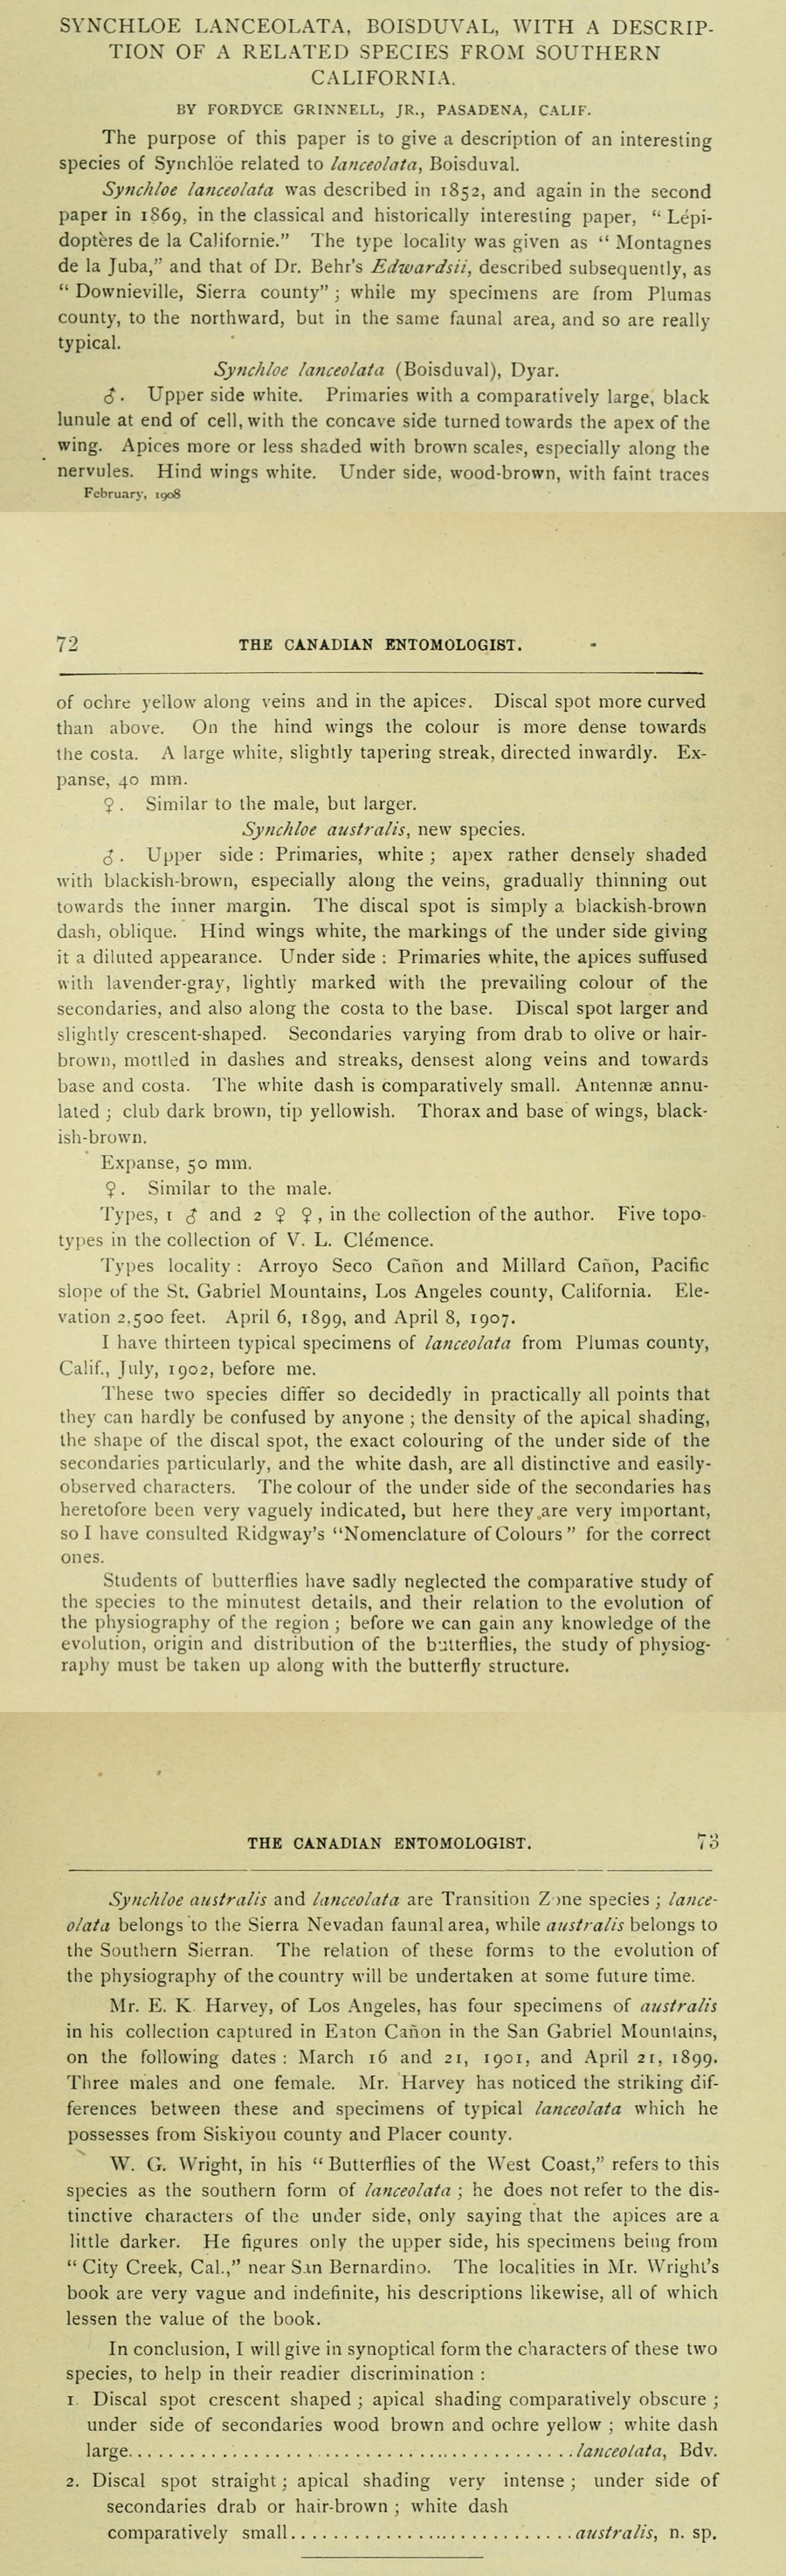 Original description of Anthocharis lanceolata australis by Fordyce Grinnell in 1908